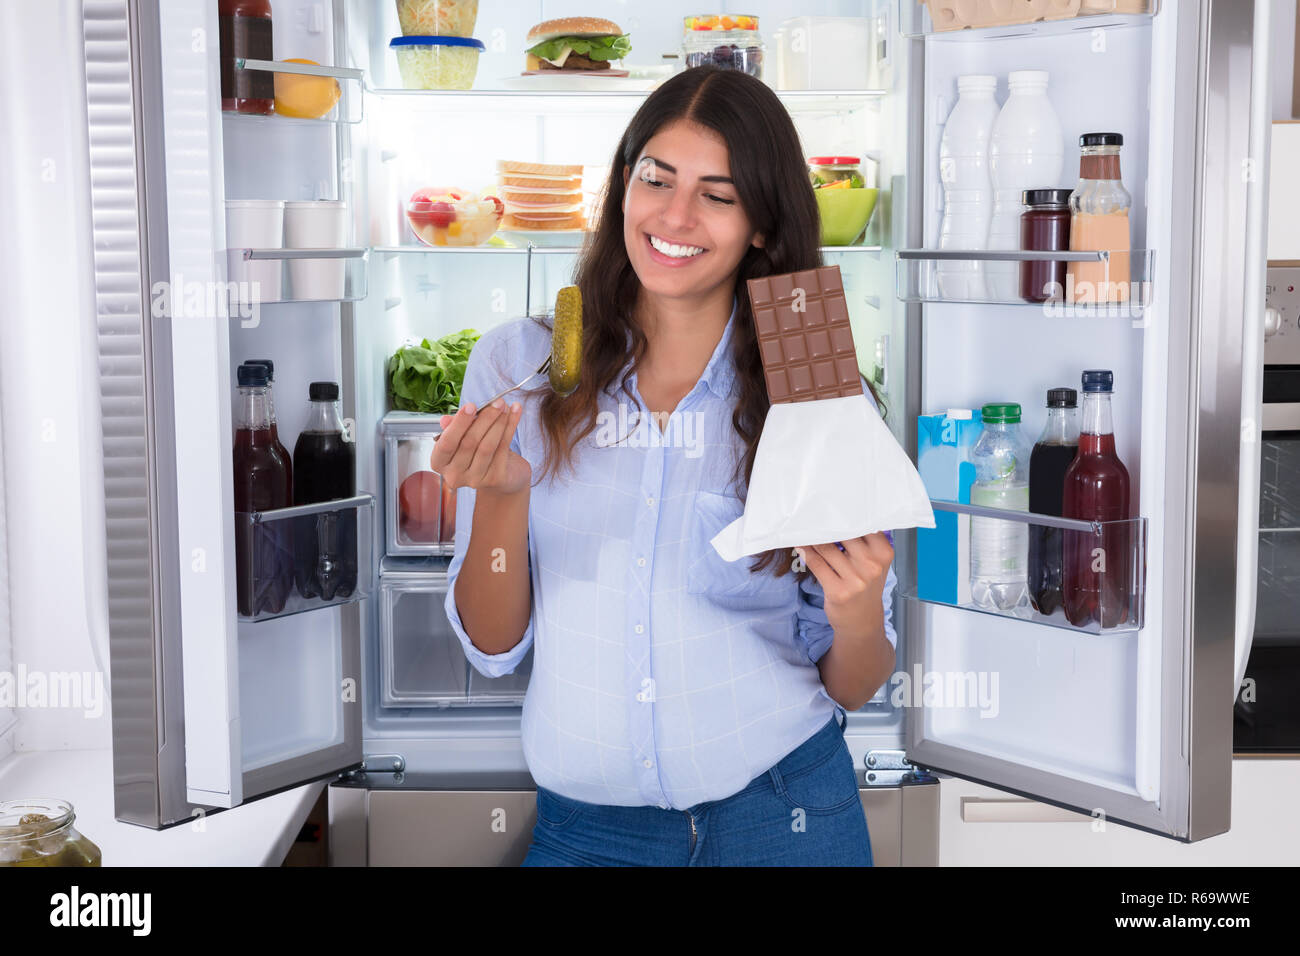 Young Woman Eating Chocolate Stock Photo